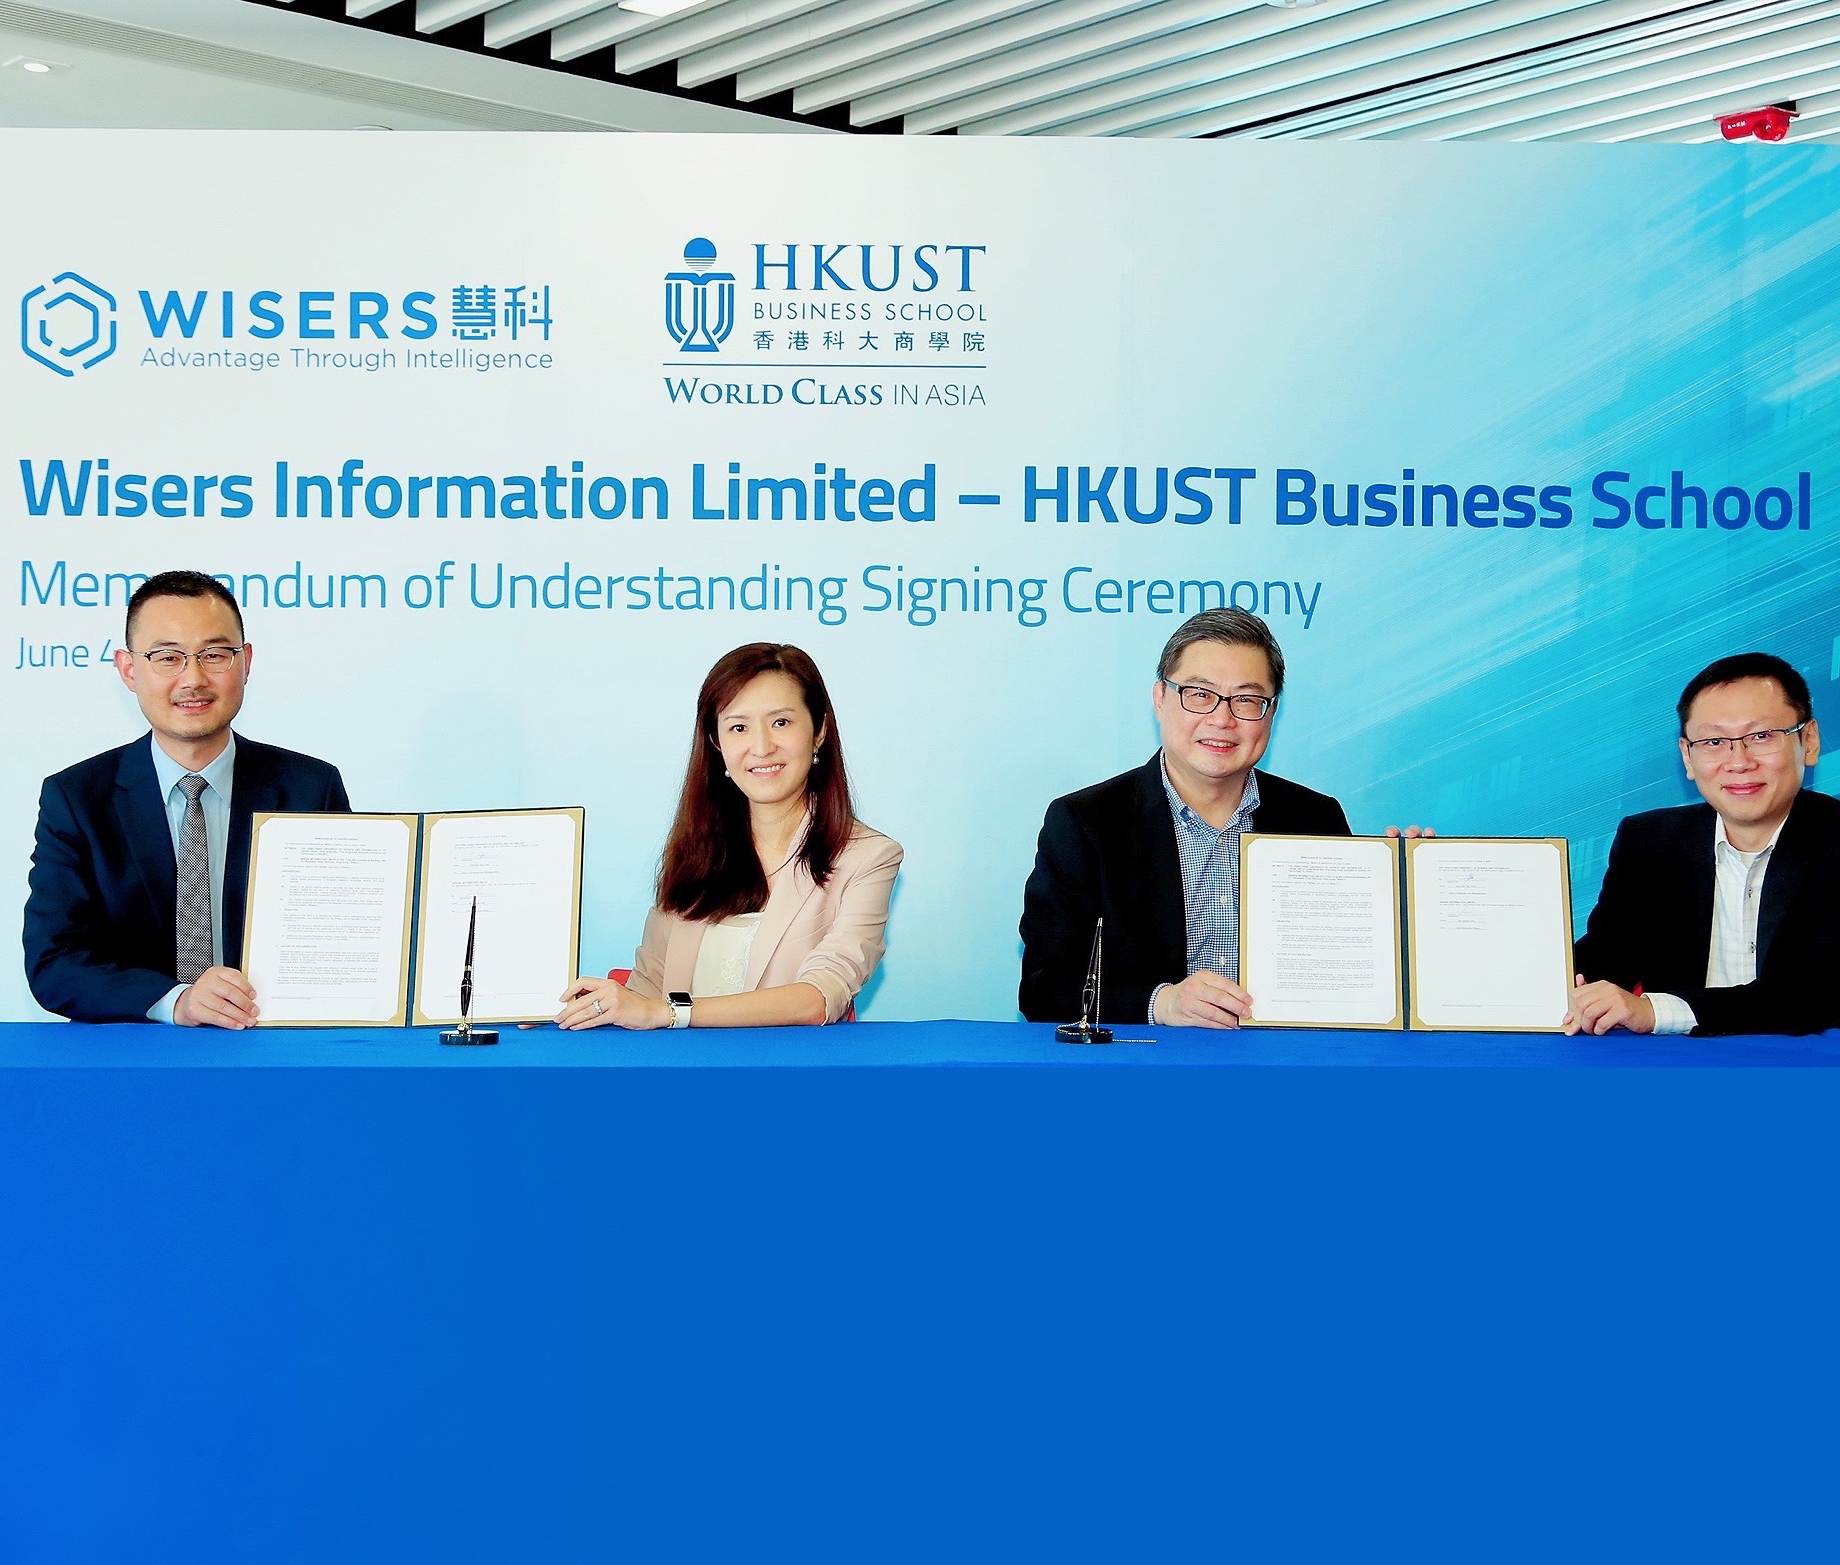 Wisers Signs MoU with HKUST for Business and Social Issue Research Using Massive All-media Big Data and AI